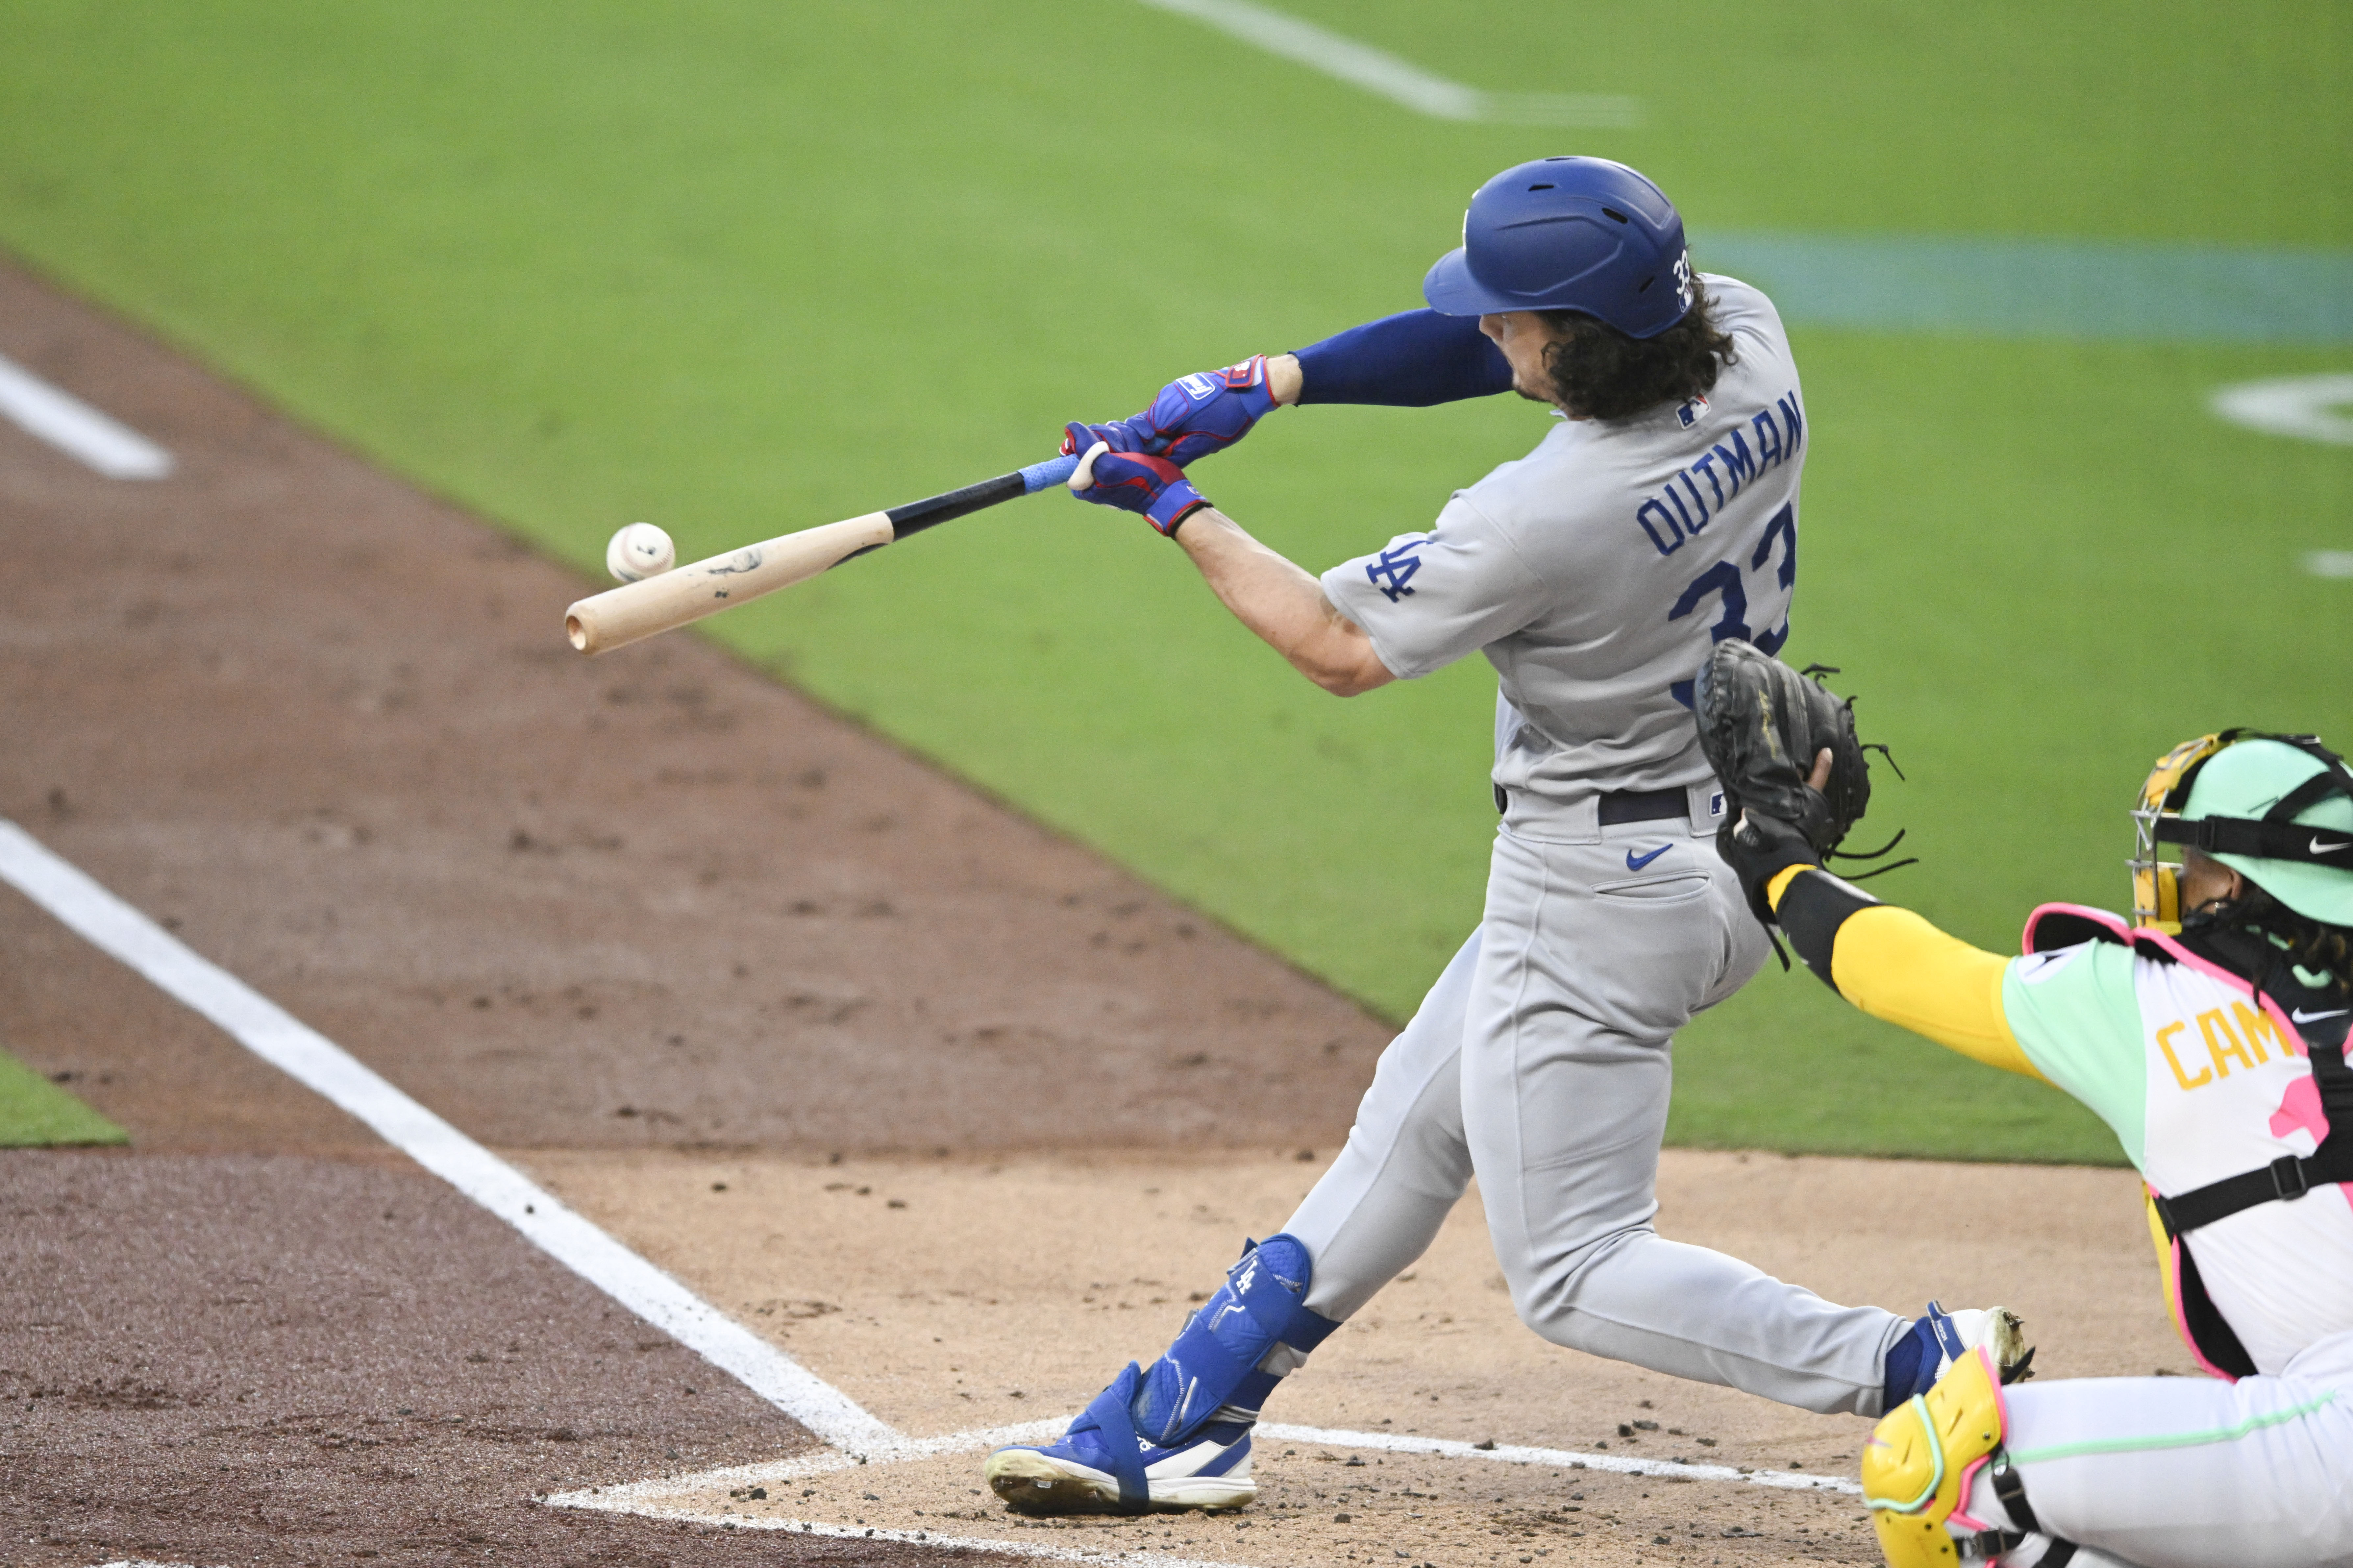 Padres hit four home runs in win over Blue Jays